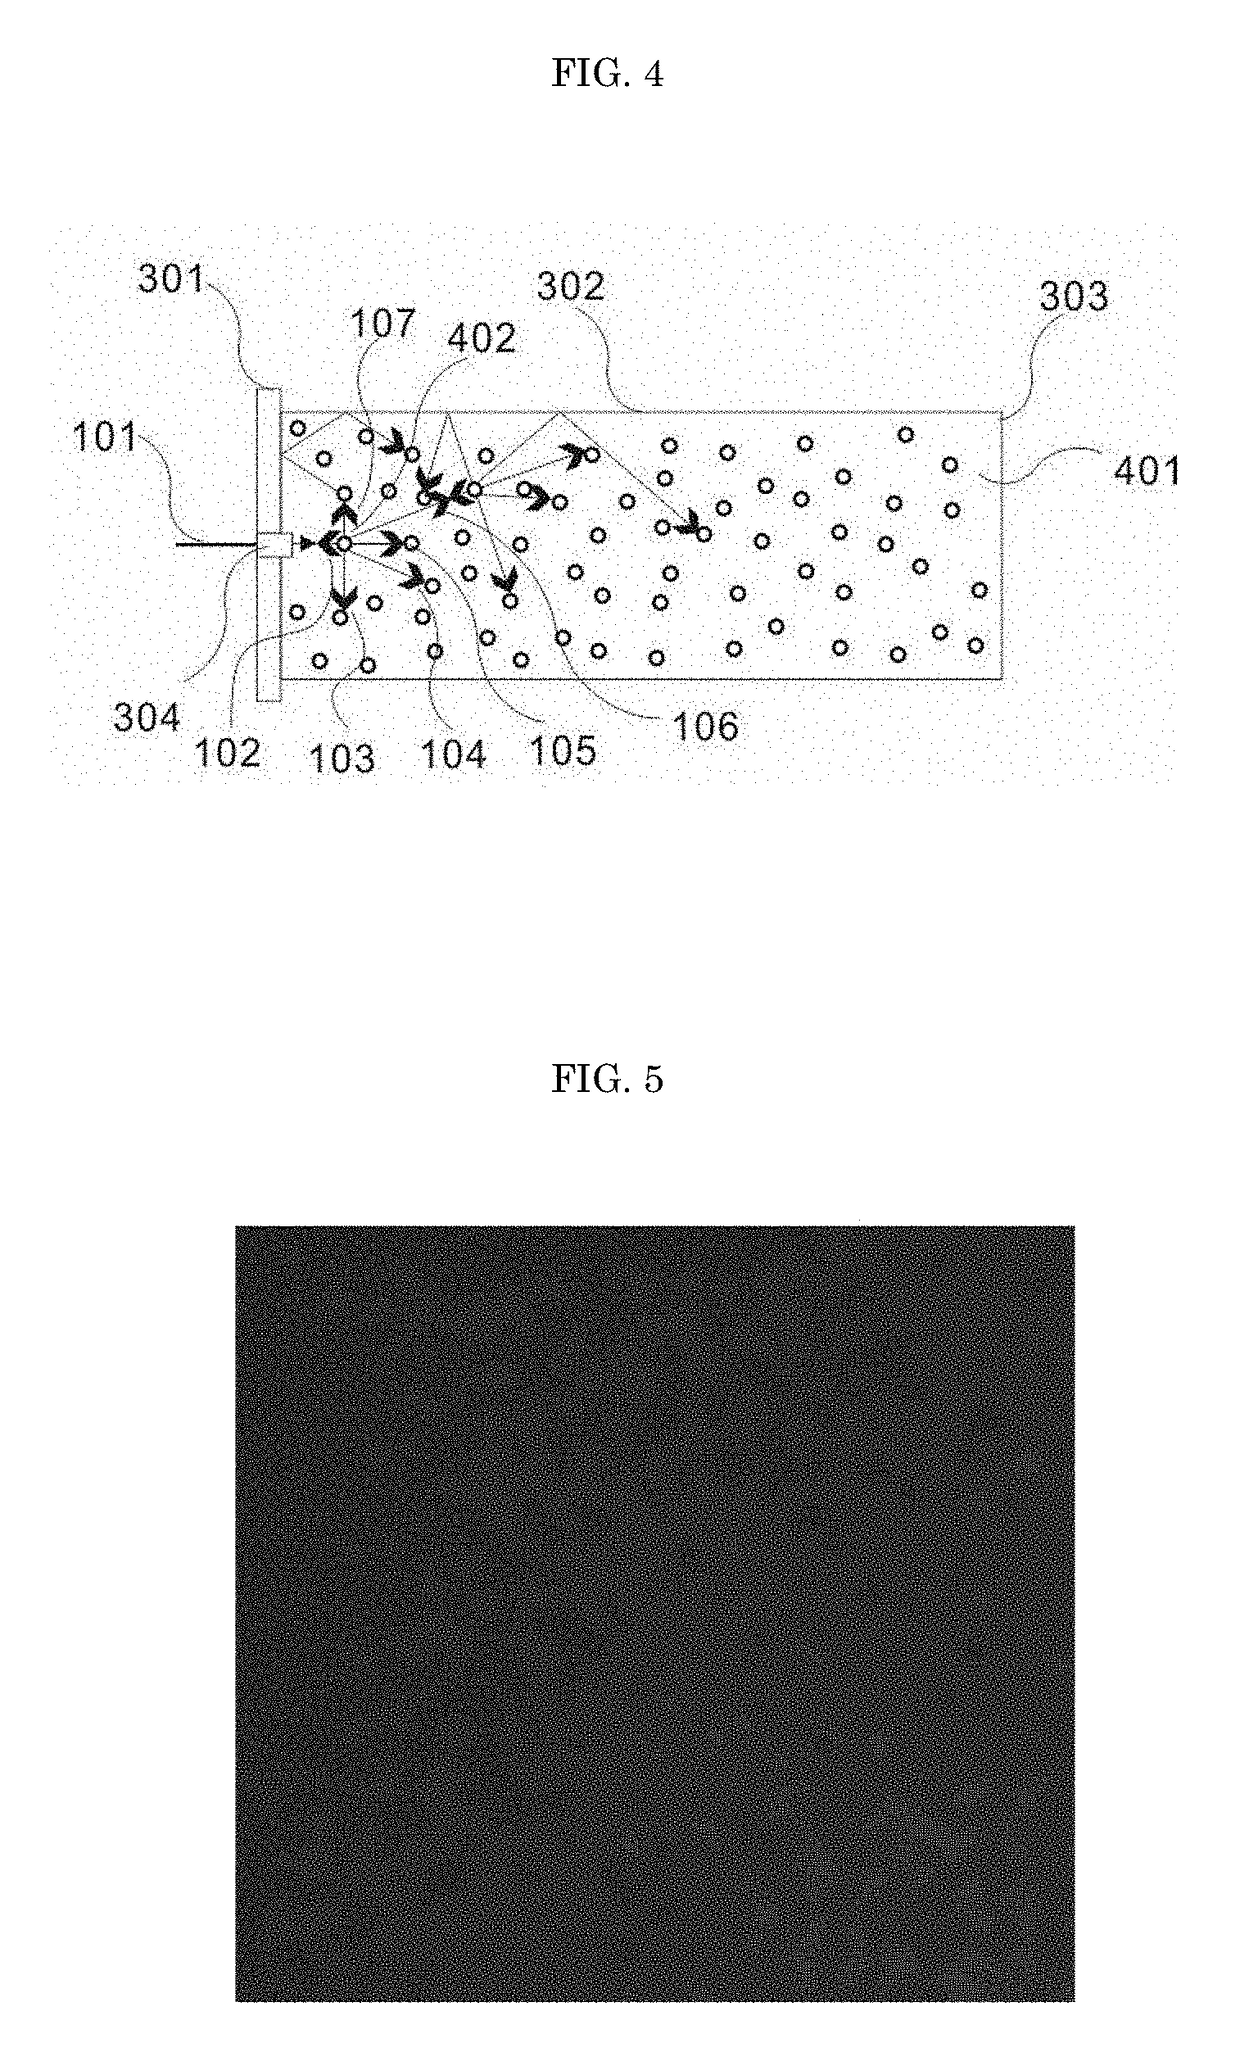 Speckle reduction apparatus based on Mie scattering, perturbation drive, and optical reflective chamber